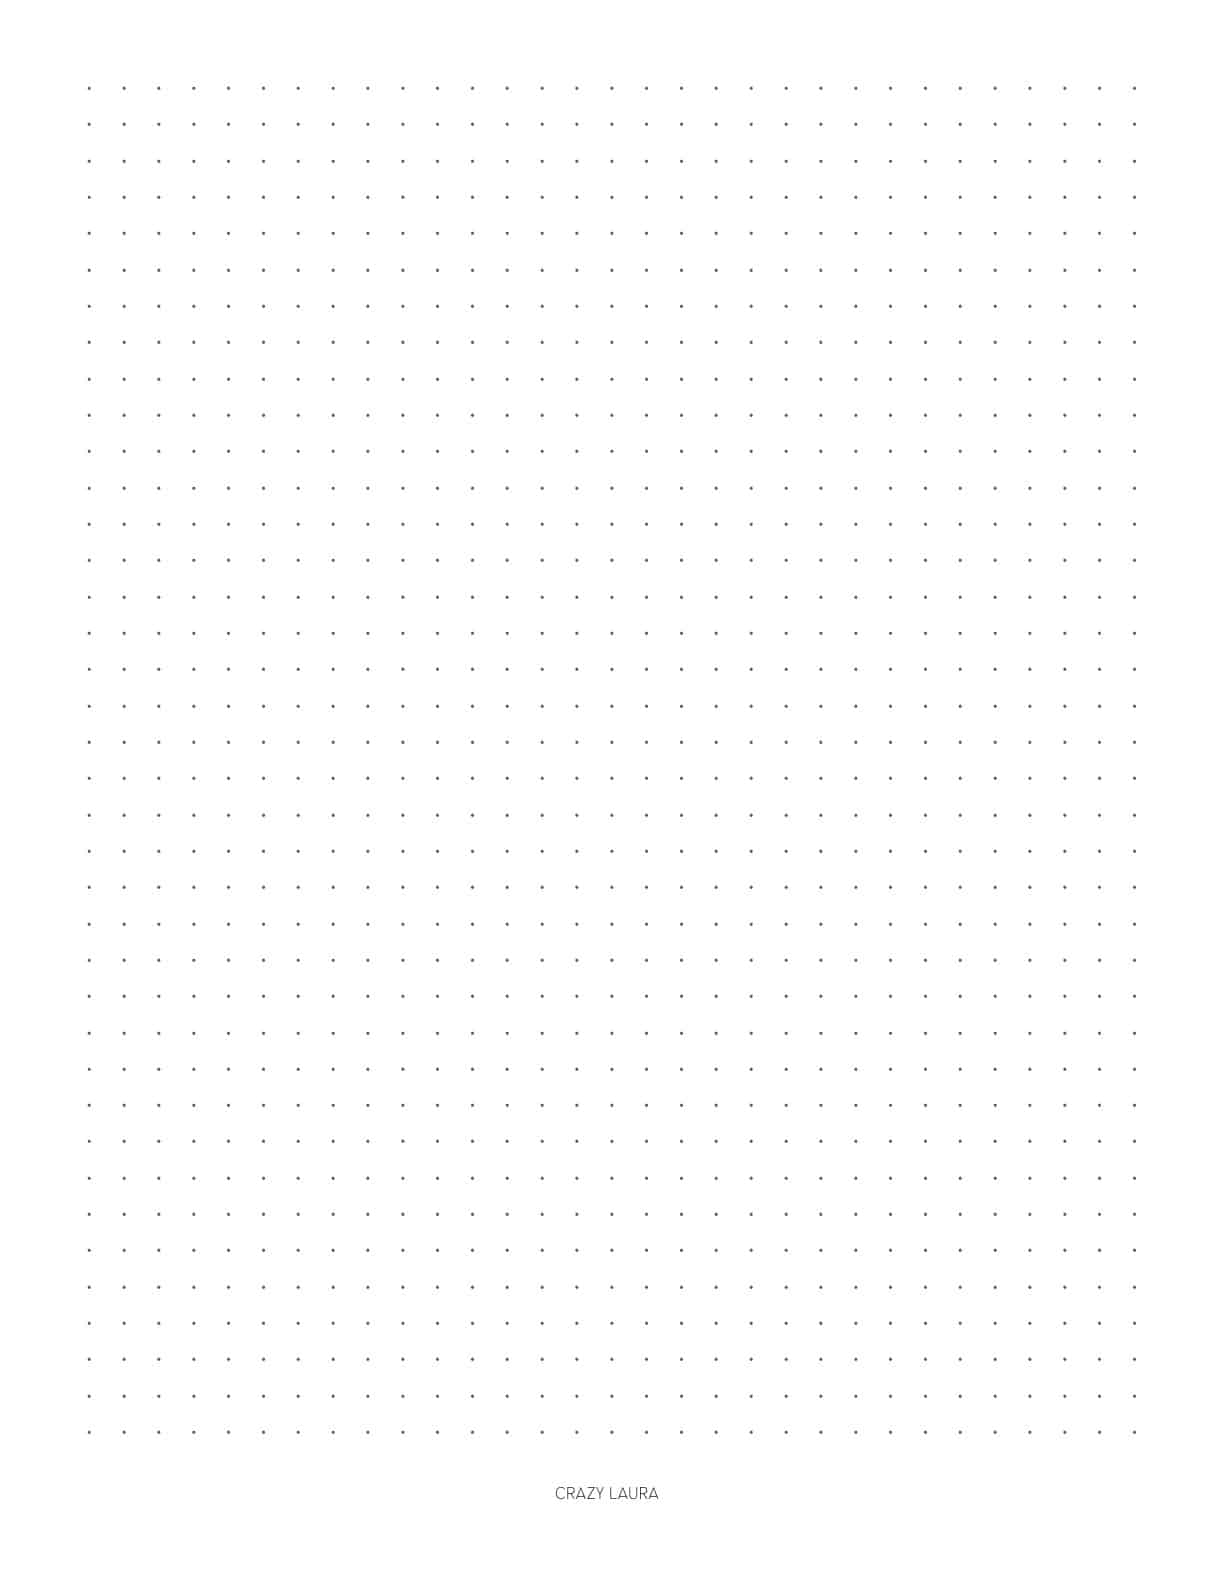 small dotted grid paper